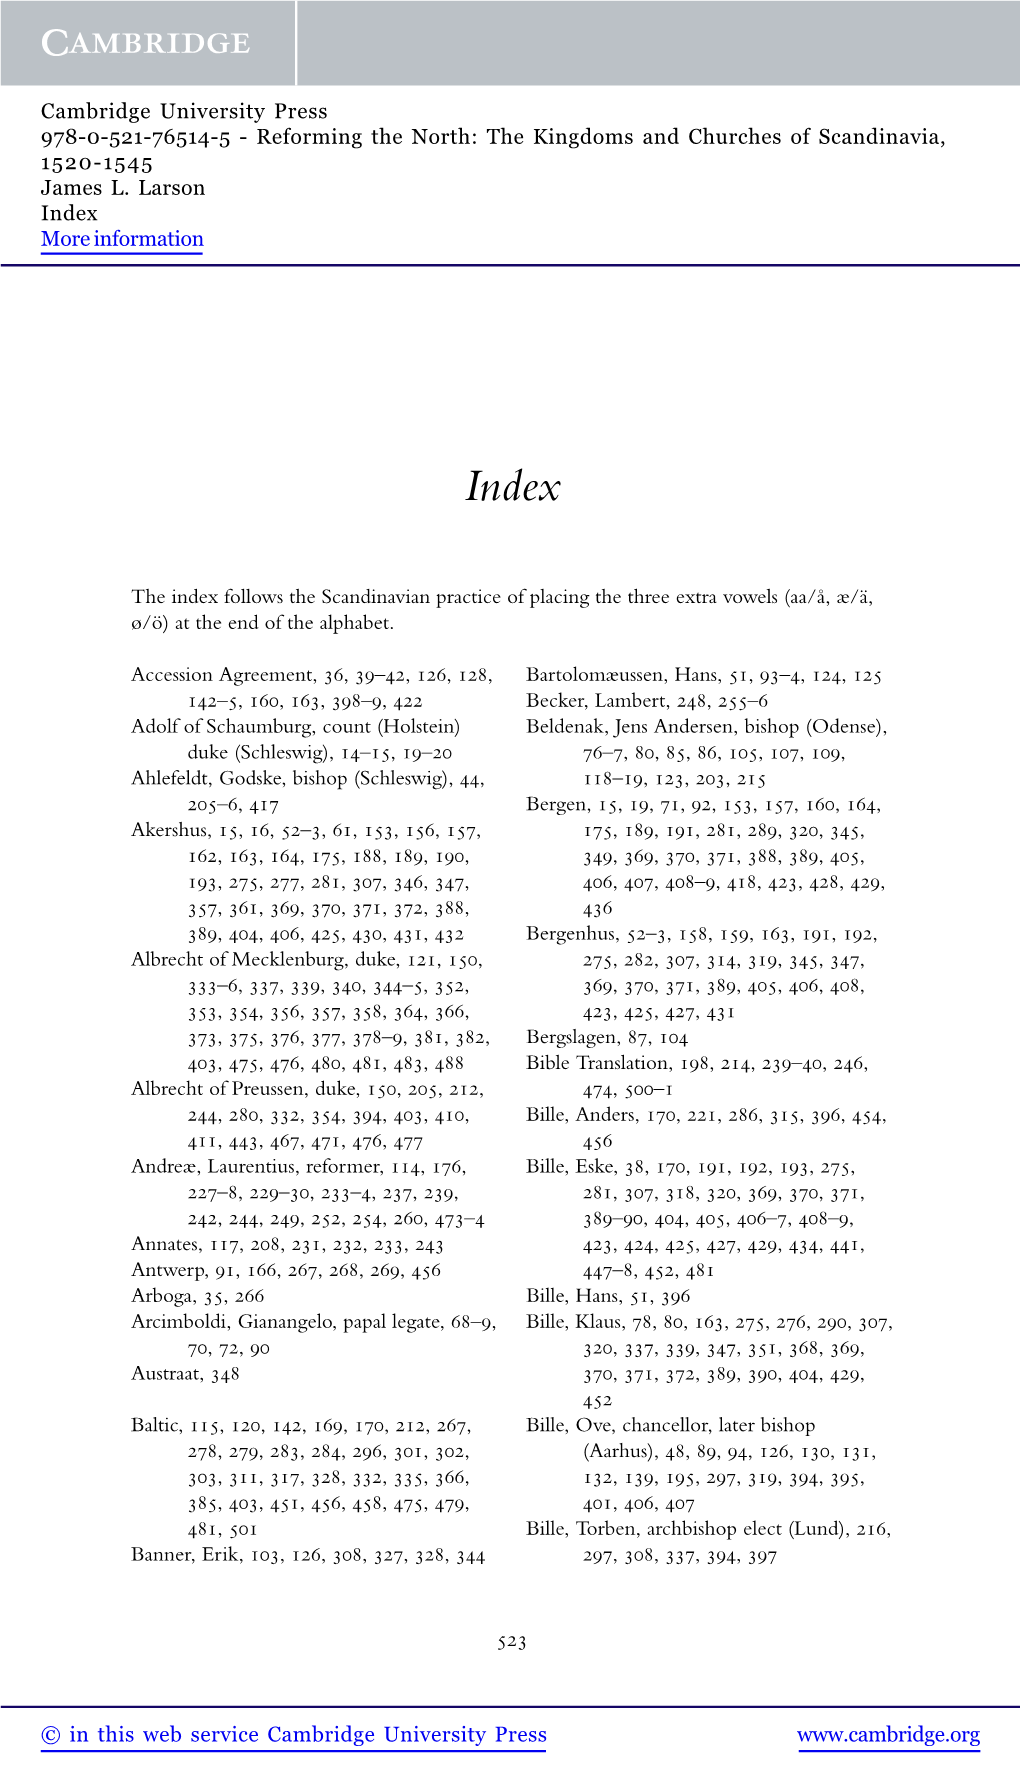 The Index Follows the Scandinavian Practice of Placing the Three Extra Vowels (Aa/A,˚ Æ/A,¨ Ø/O)¨ at the End of the Alphabet